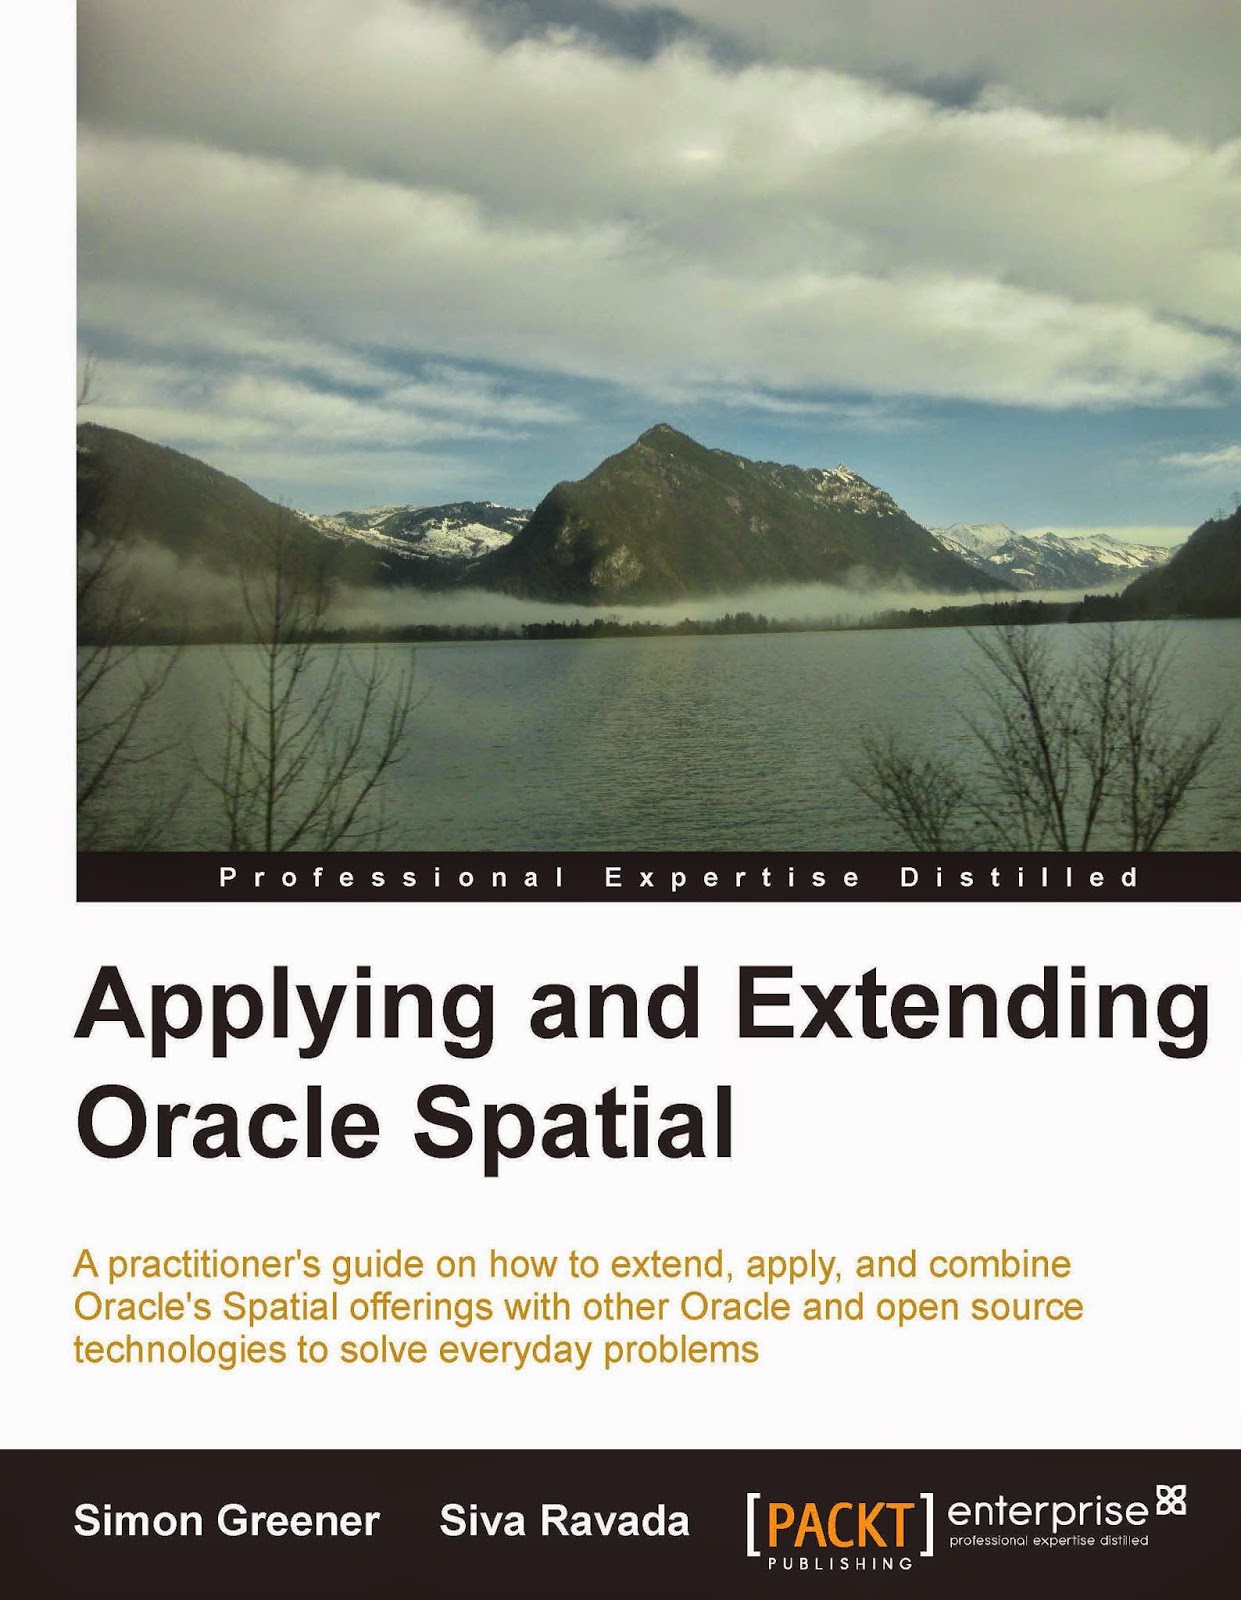 http://kingcheapebook.blogspot.com/2014/07/applying-and-extending-oracle-spatial.html